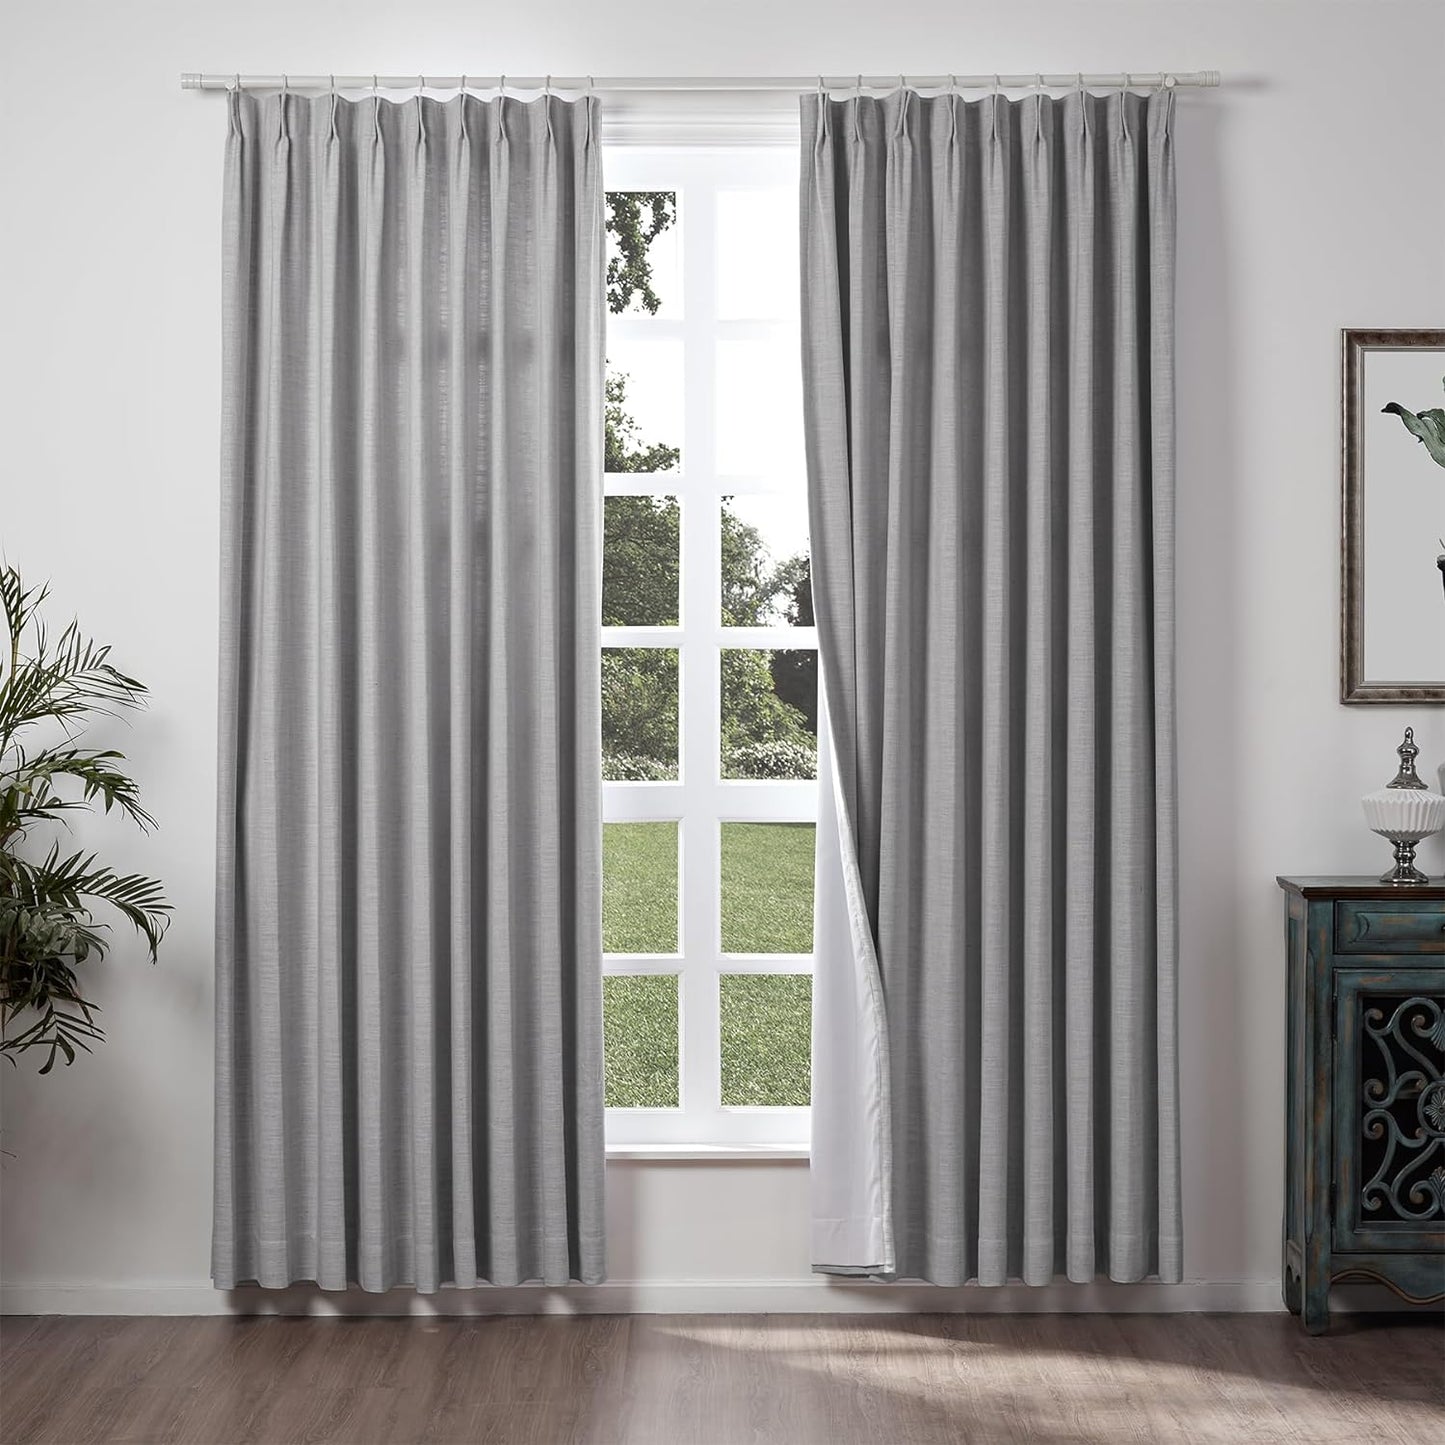 Chadmade 50" W X 84" L Polyester Linen Drape with Blackout Lining Pinch Pleat Curtain for Sliding Door Patio Door Living Room Bedroom, (1 Panel) Beige White Liz Collection  ChadMade Rock Grey (12) 84Wx84L 